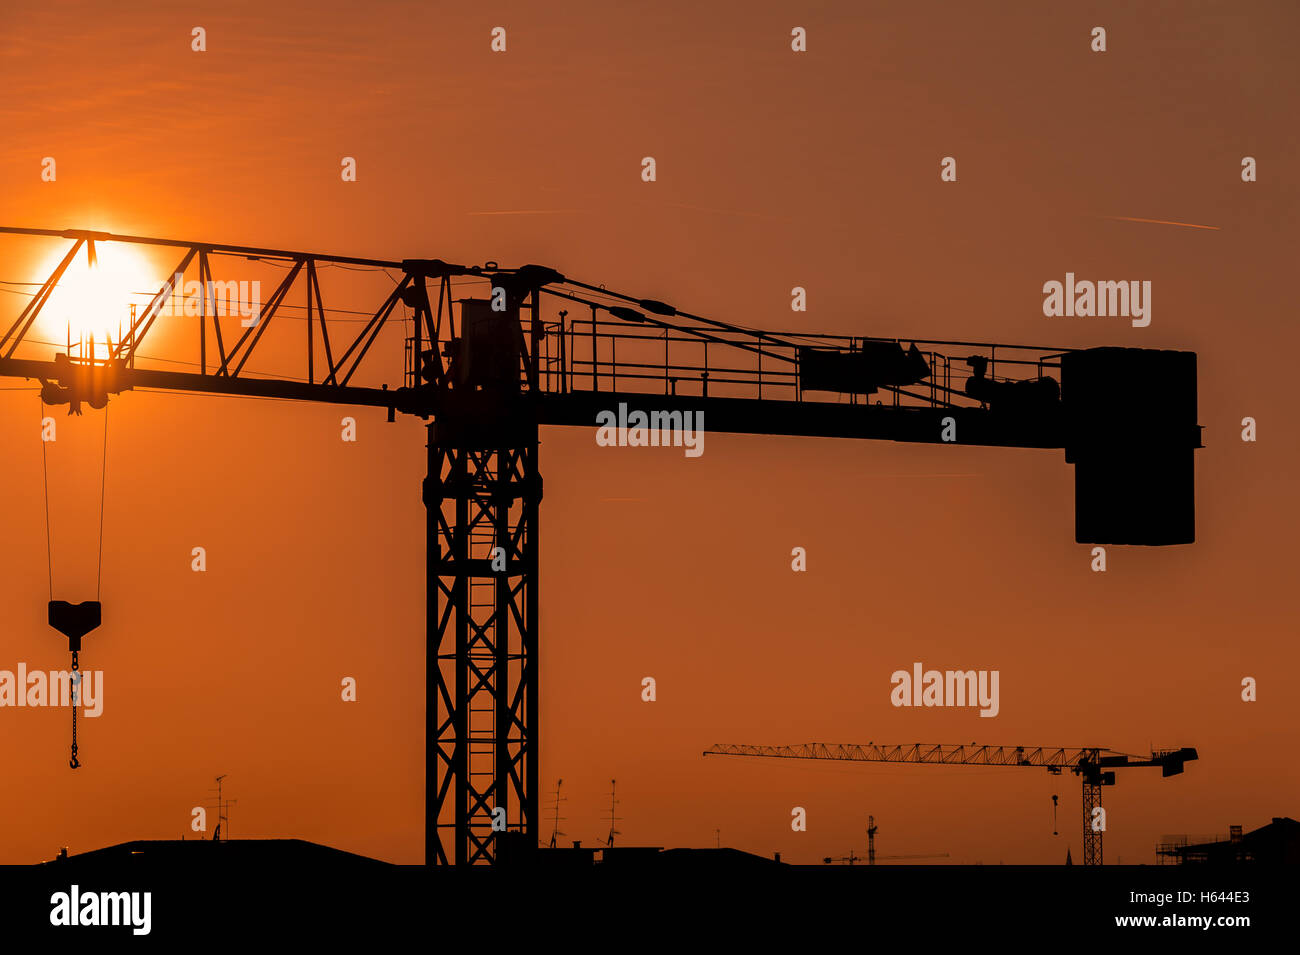 Tower crane on a construction site at sunset or sunrise Stock Photo